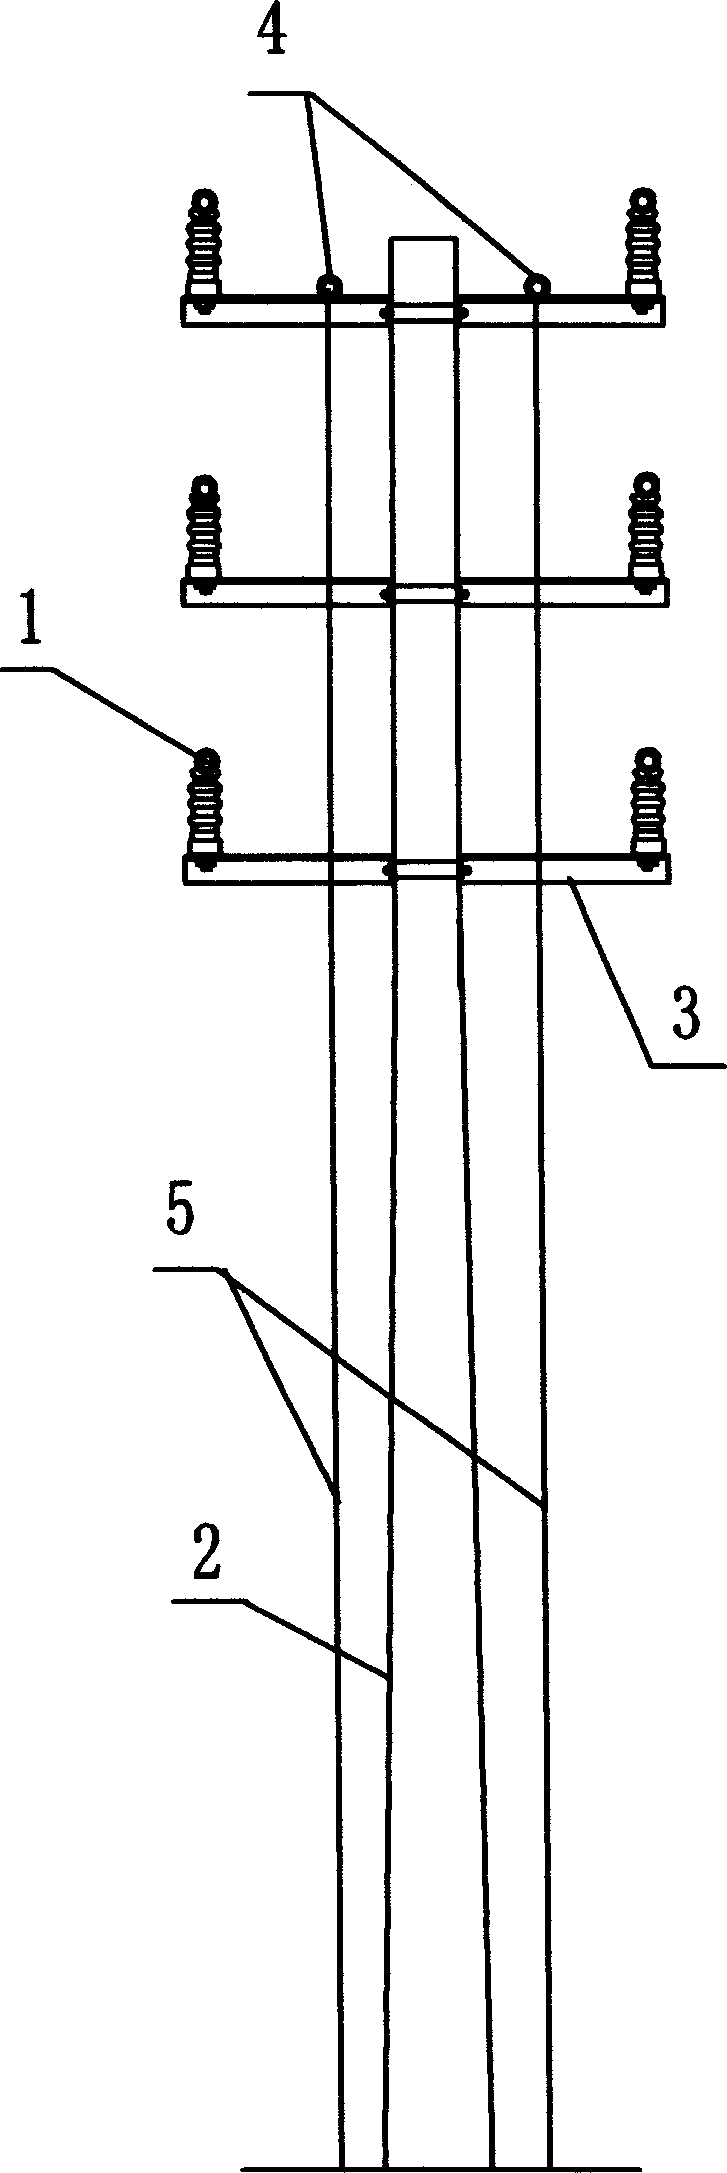 Lightning-inductive shielding line for 10KV overhead insulated conducting wire for preventing thunderstrike breakage